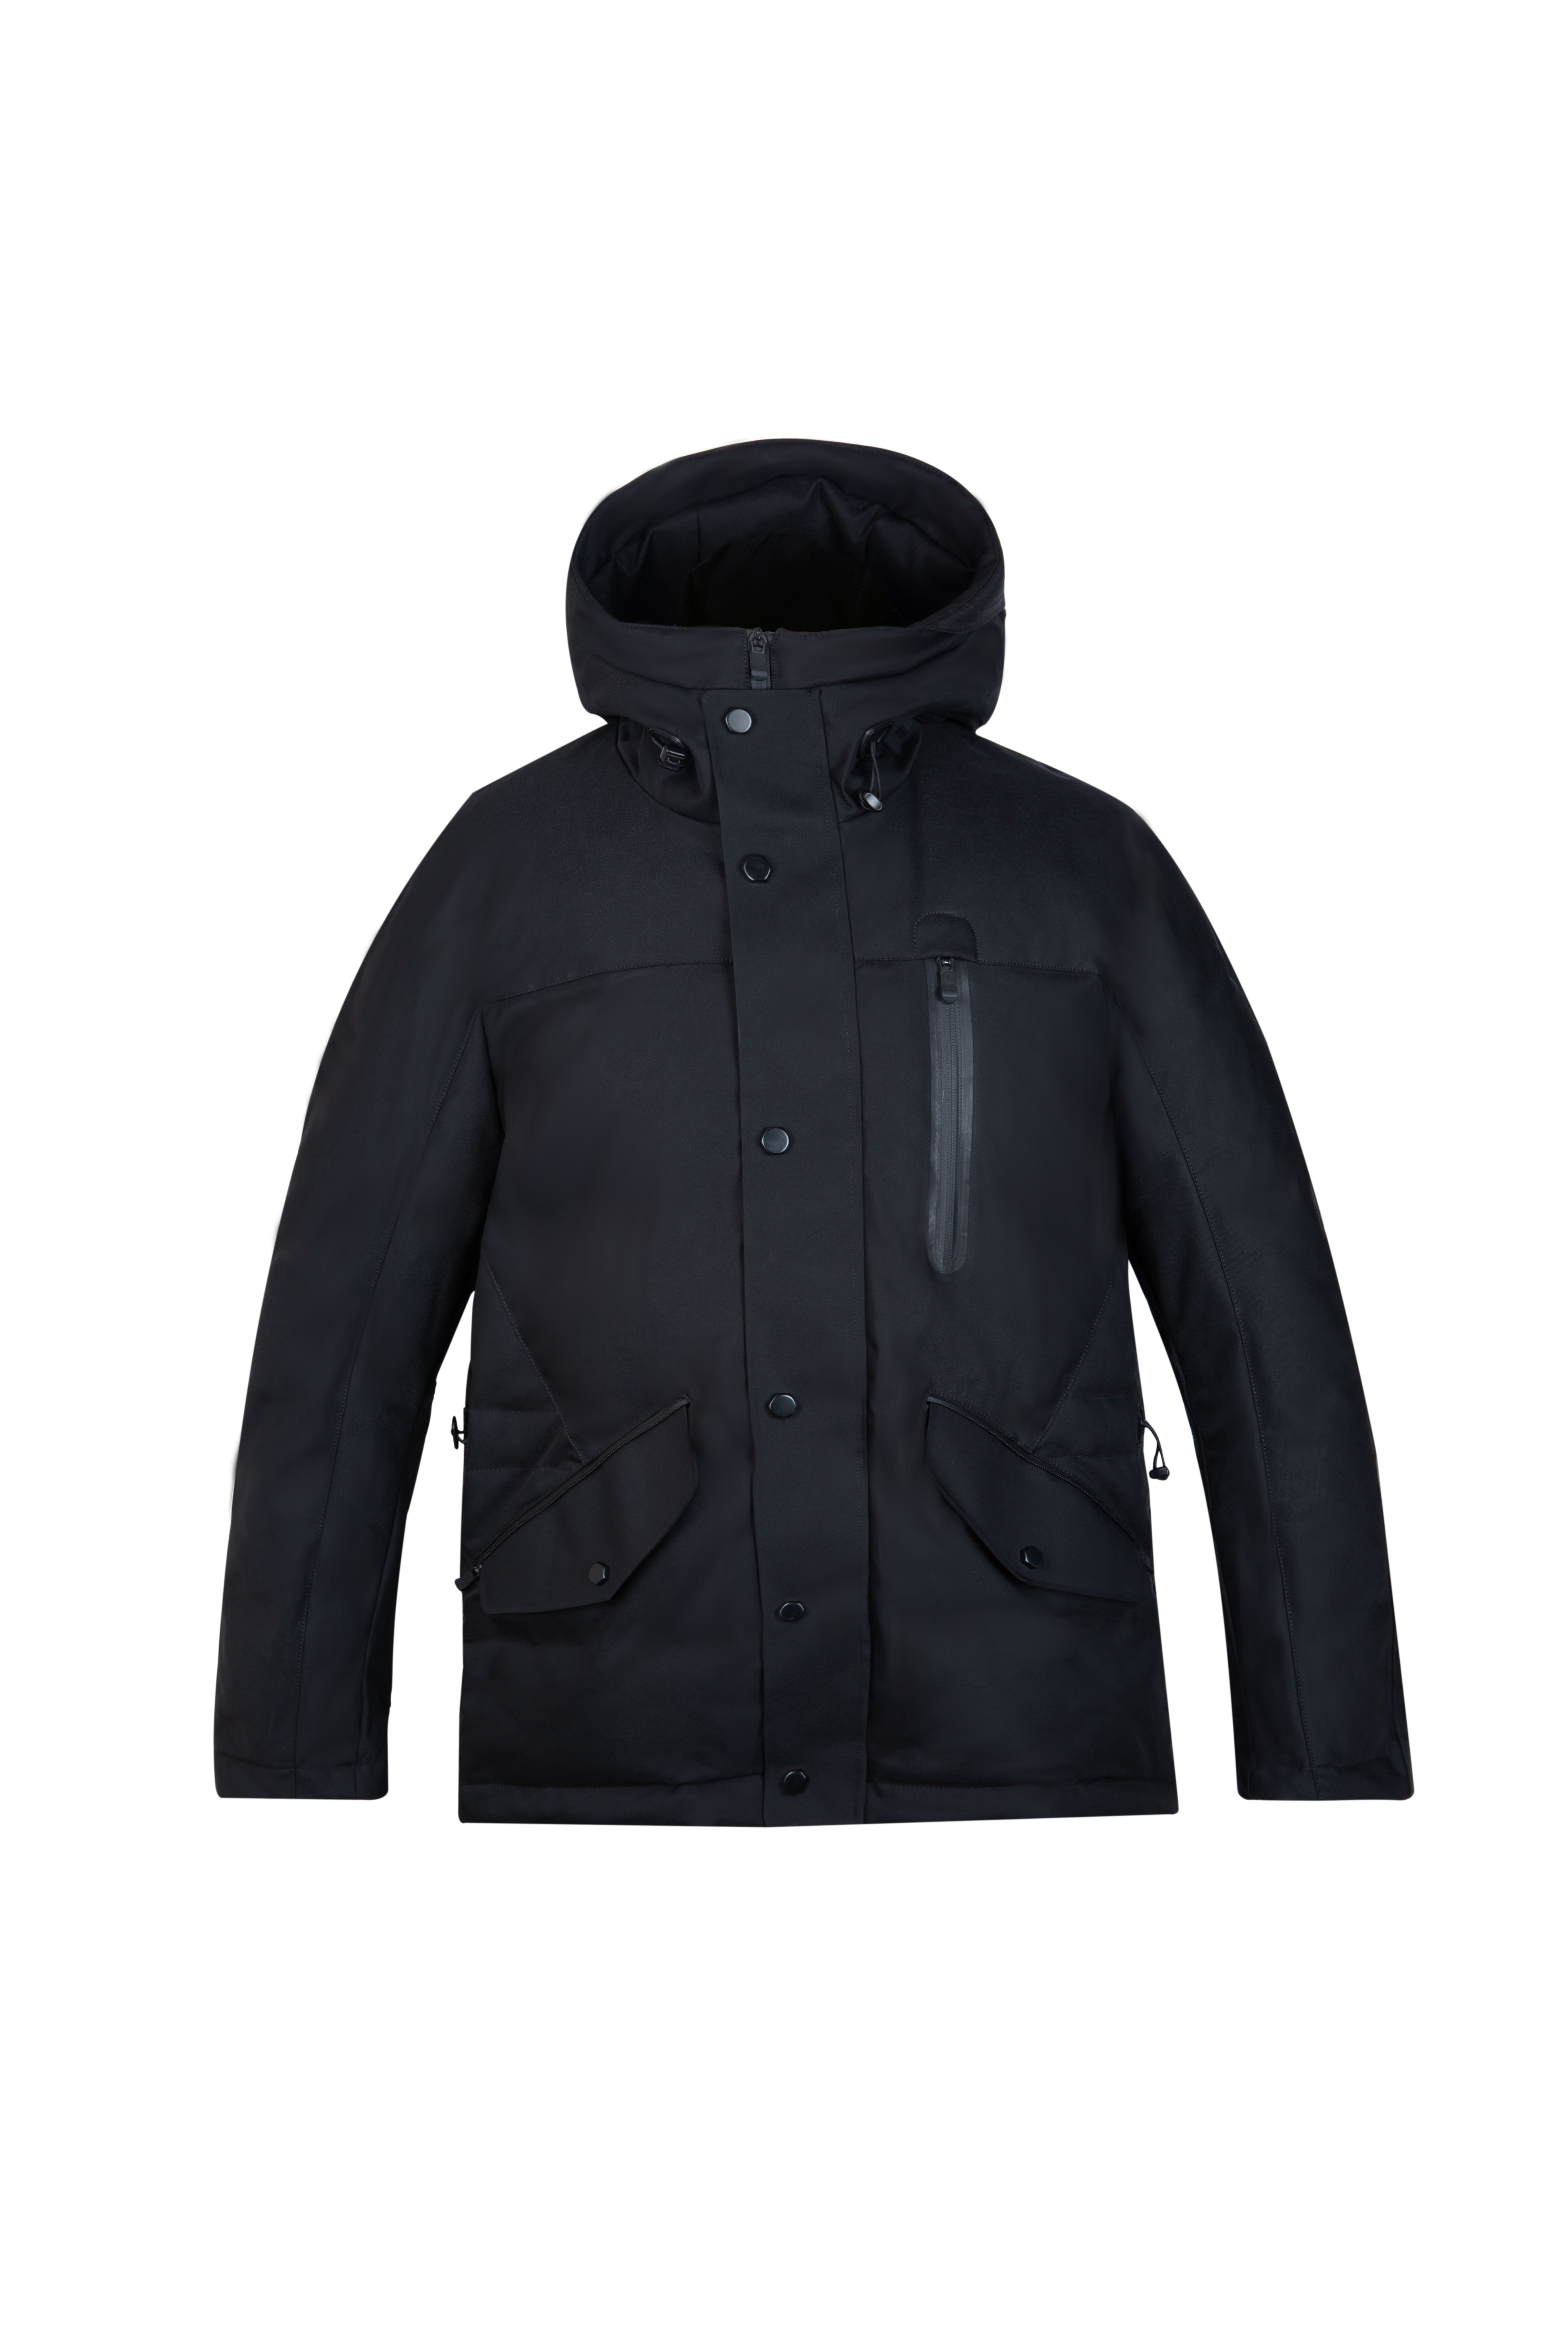 north face down jacket cost